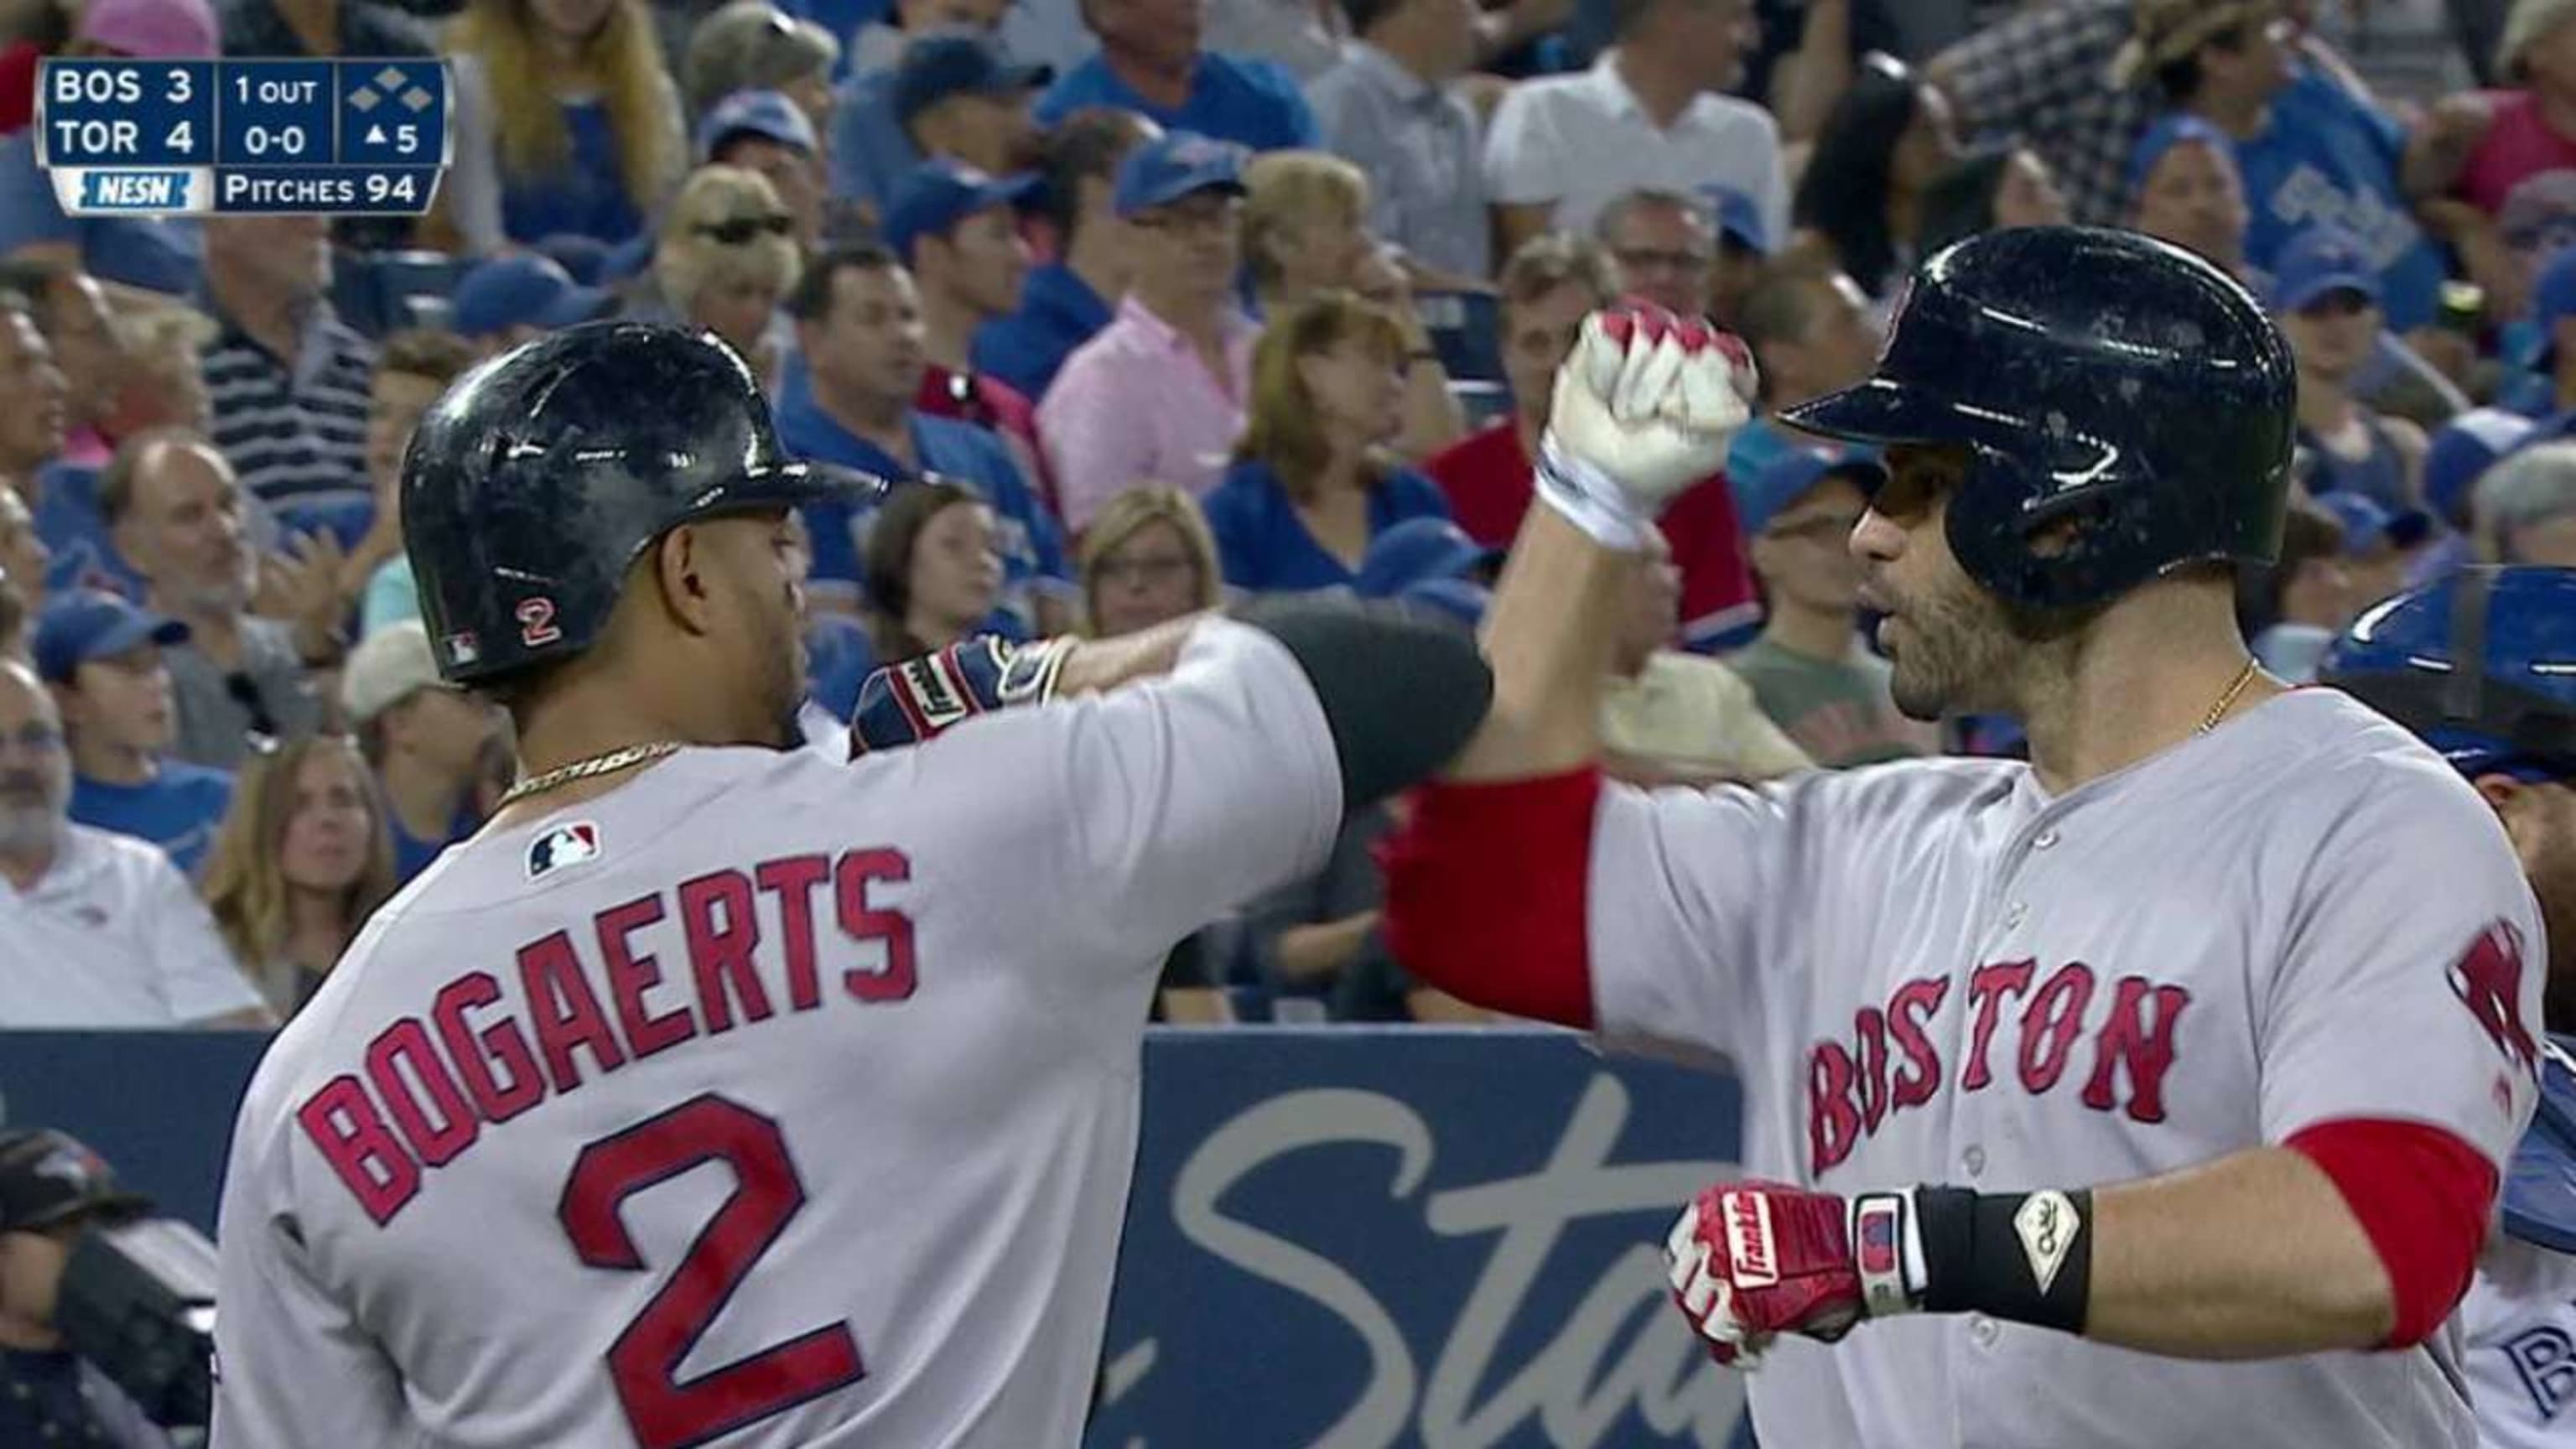 August 9, 2018: Mookie Betts hits for the cycle, but Red Sox fall